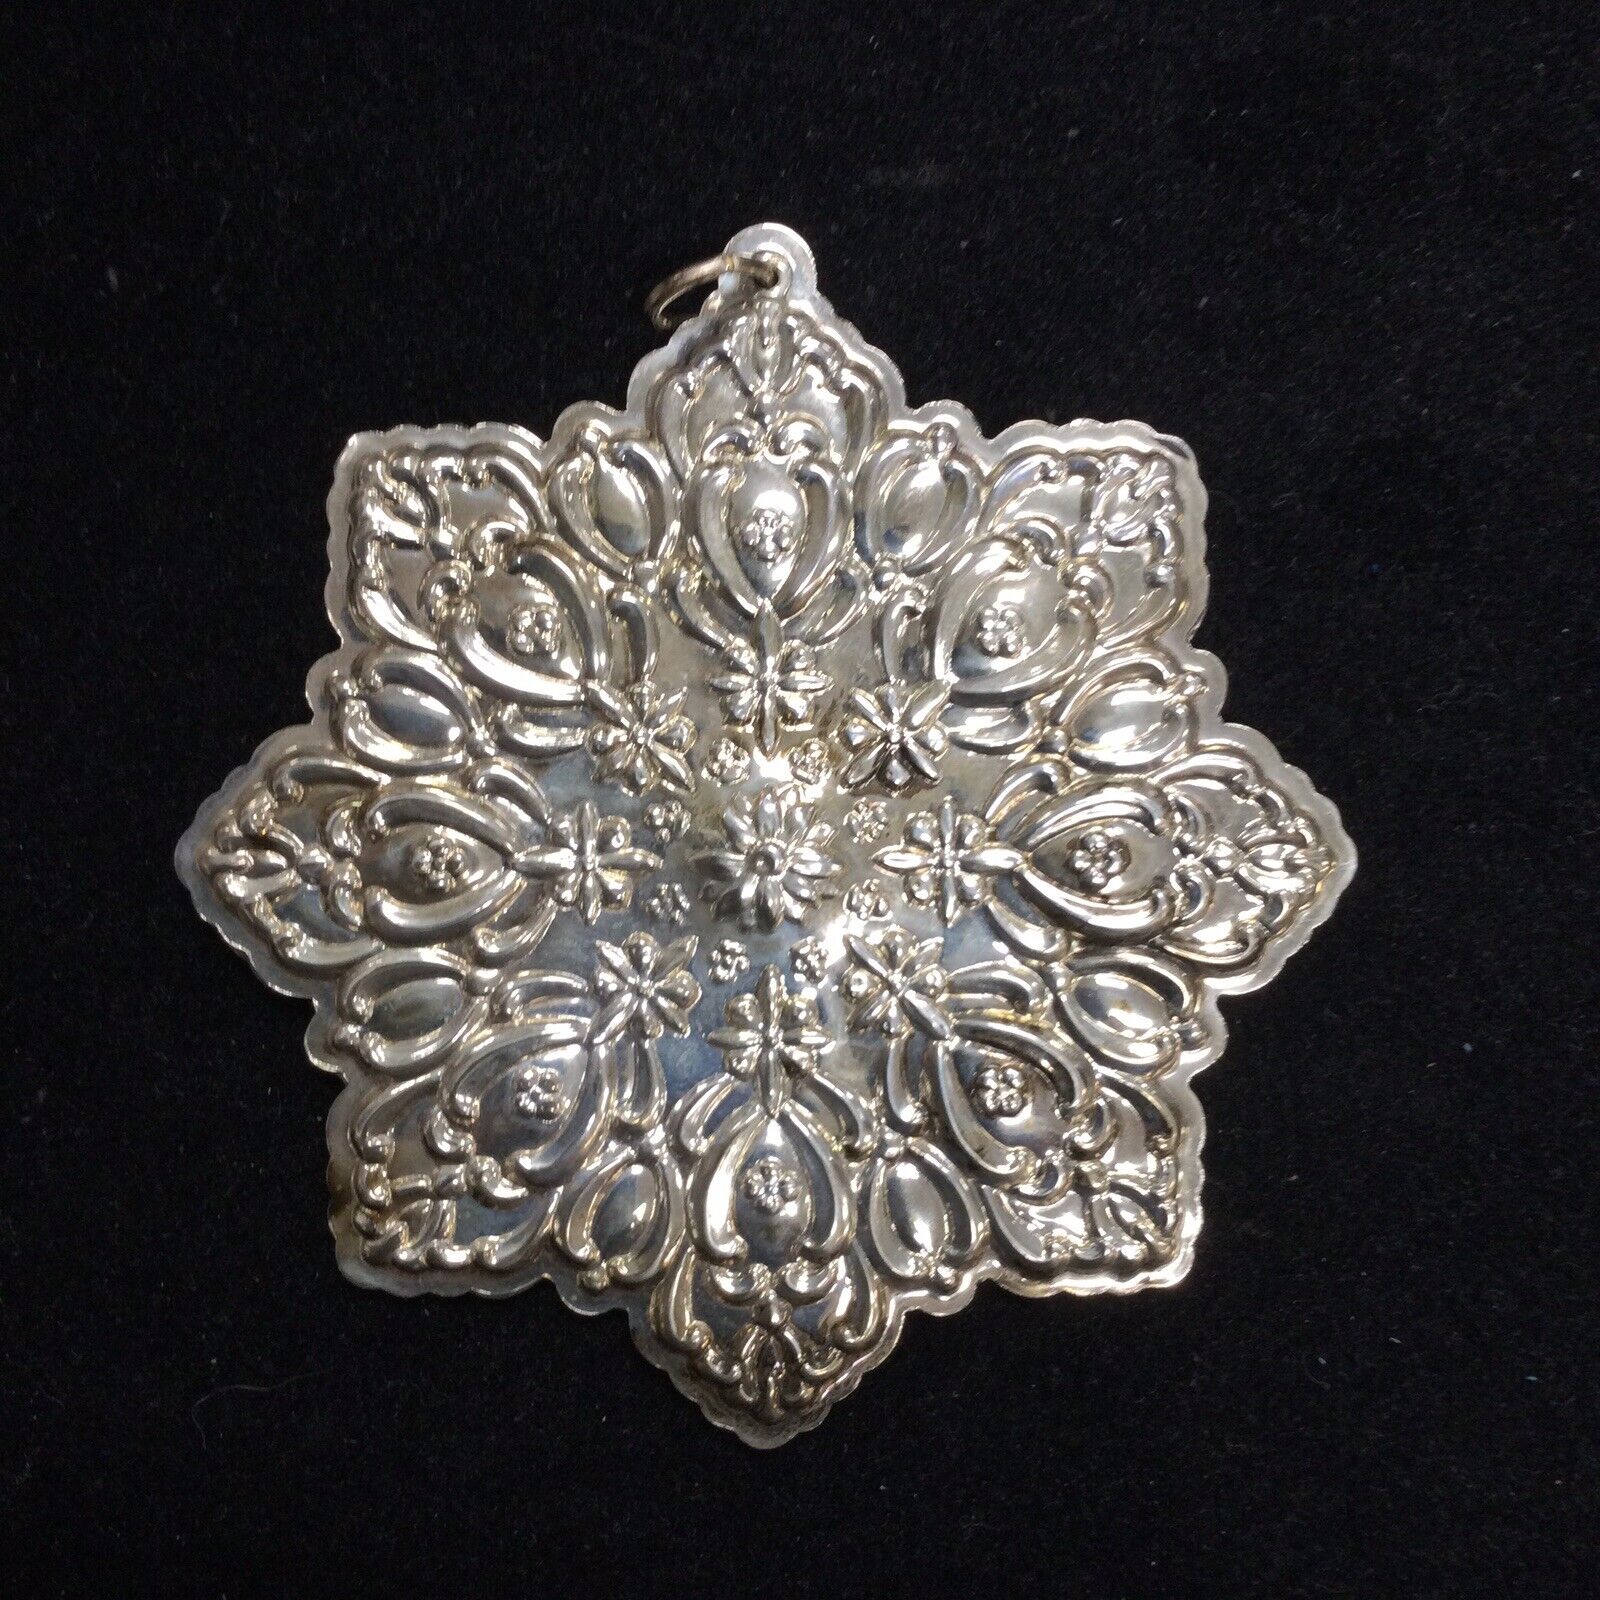 1994 Towle Old Master Snowflake Sterling Ornament